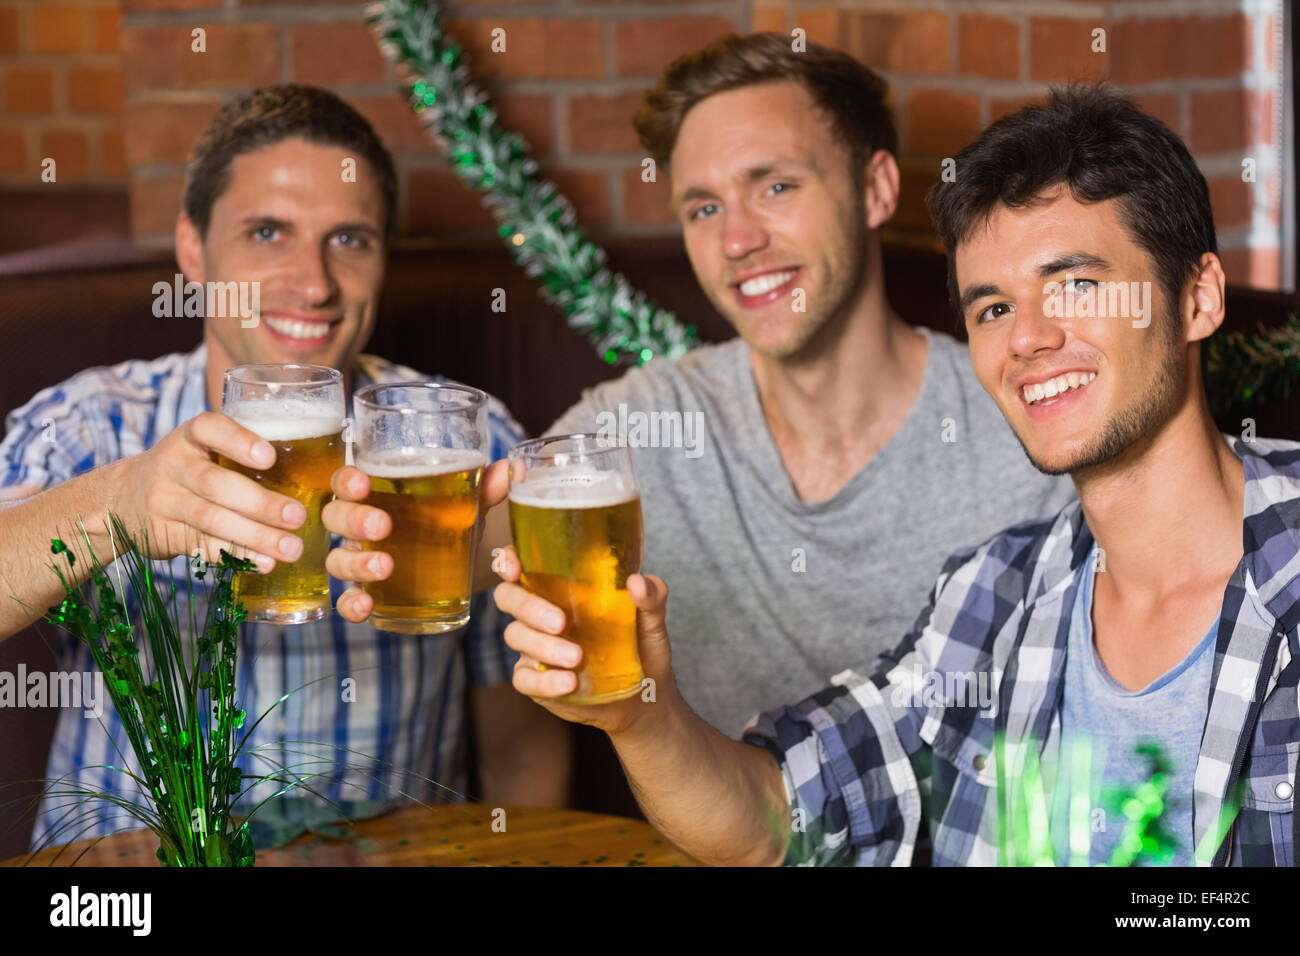 Happy friends toasting with pints of beer on patricks day Stock Photo